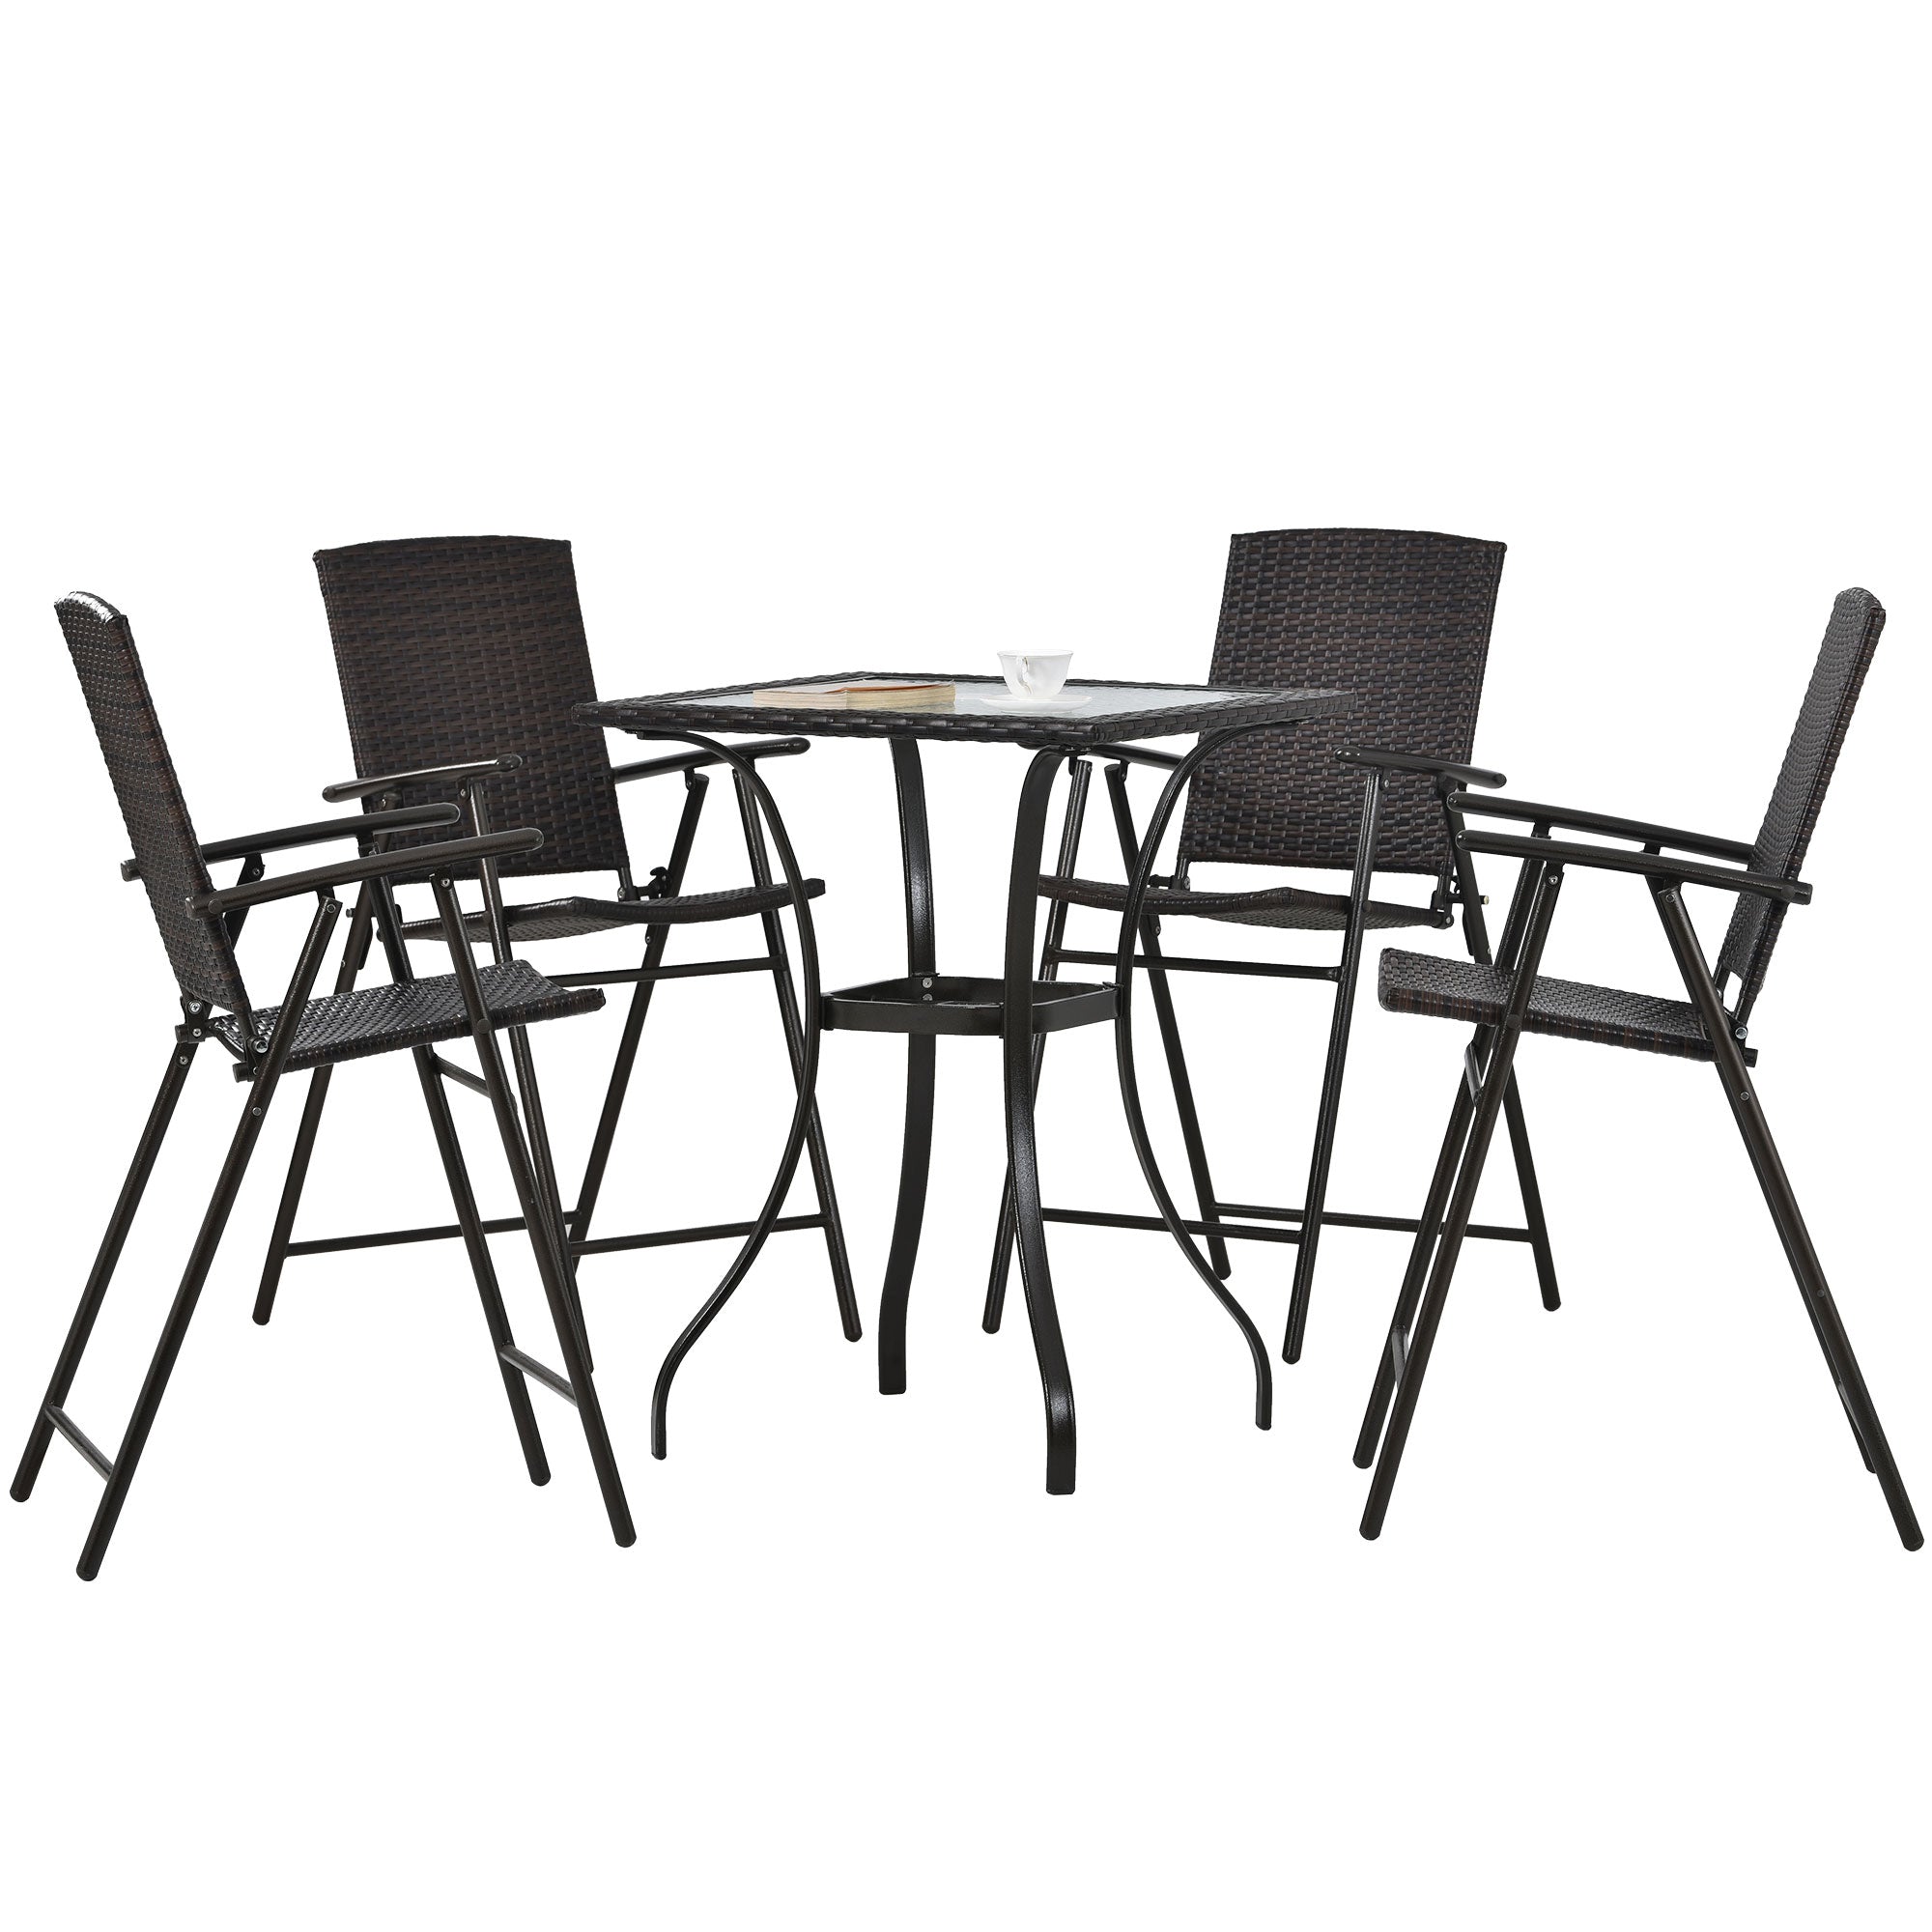 [KGORGE Plus] Outdoor Patio PE Wicker 5-Piece Counter Height Dining Table Set with Umbrella Hole and 4 Foldable Chairs